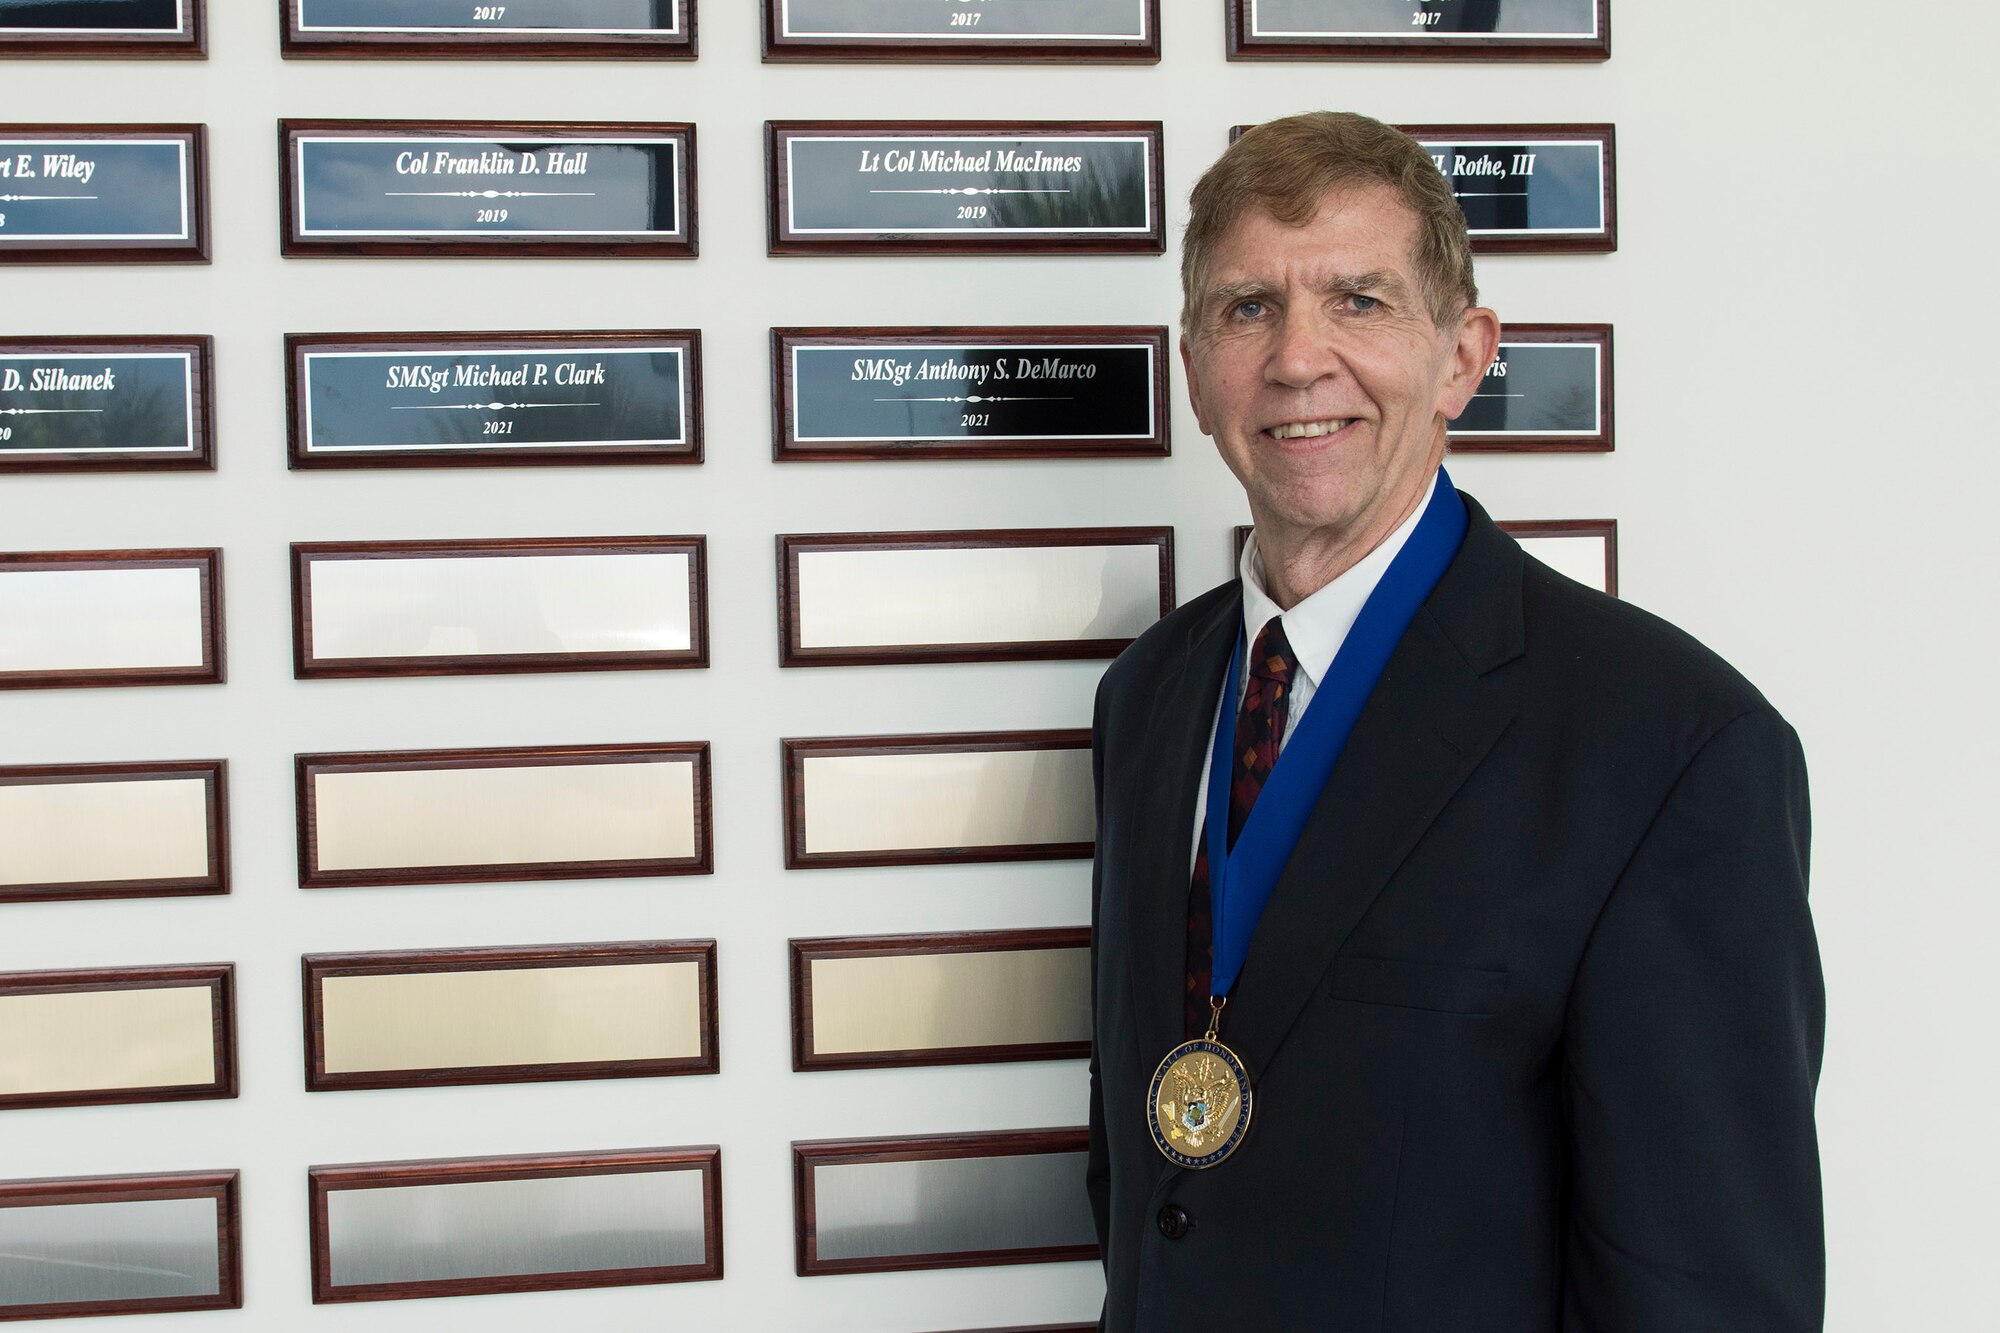 Retired Air Force Senior Master Sgt. Mike Clark poses in front of his plaque after his induction into the Air Force Technical Applications Center's Wall of Honor May 26, 2021.  Clark was one of three inductees who were honored at a ceremony held at the nuclear treaty monitoring center to recognize his contributions to AFTAC's long range detection mission.  (U.S. Air Force photo by Matthew S. Jurgens)